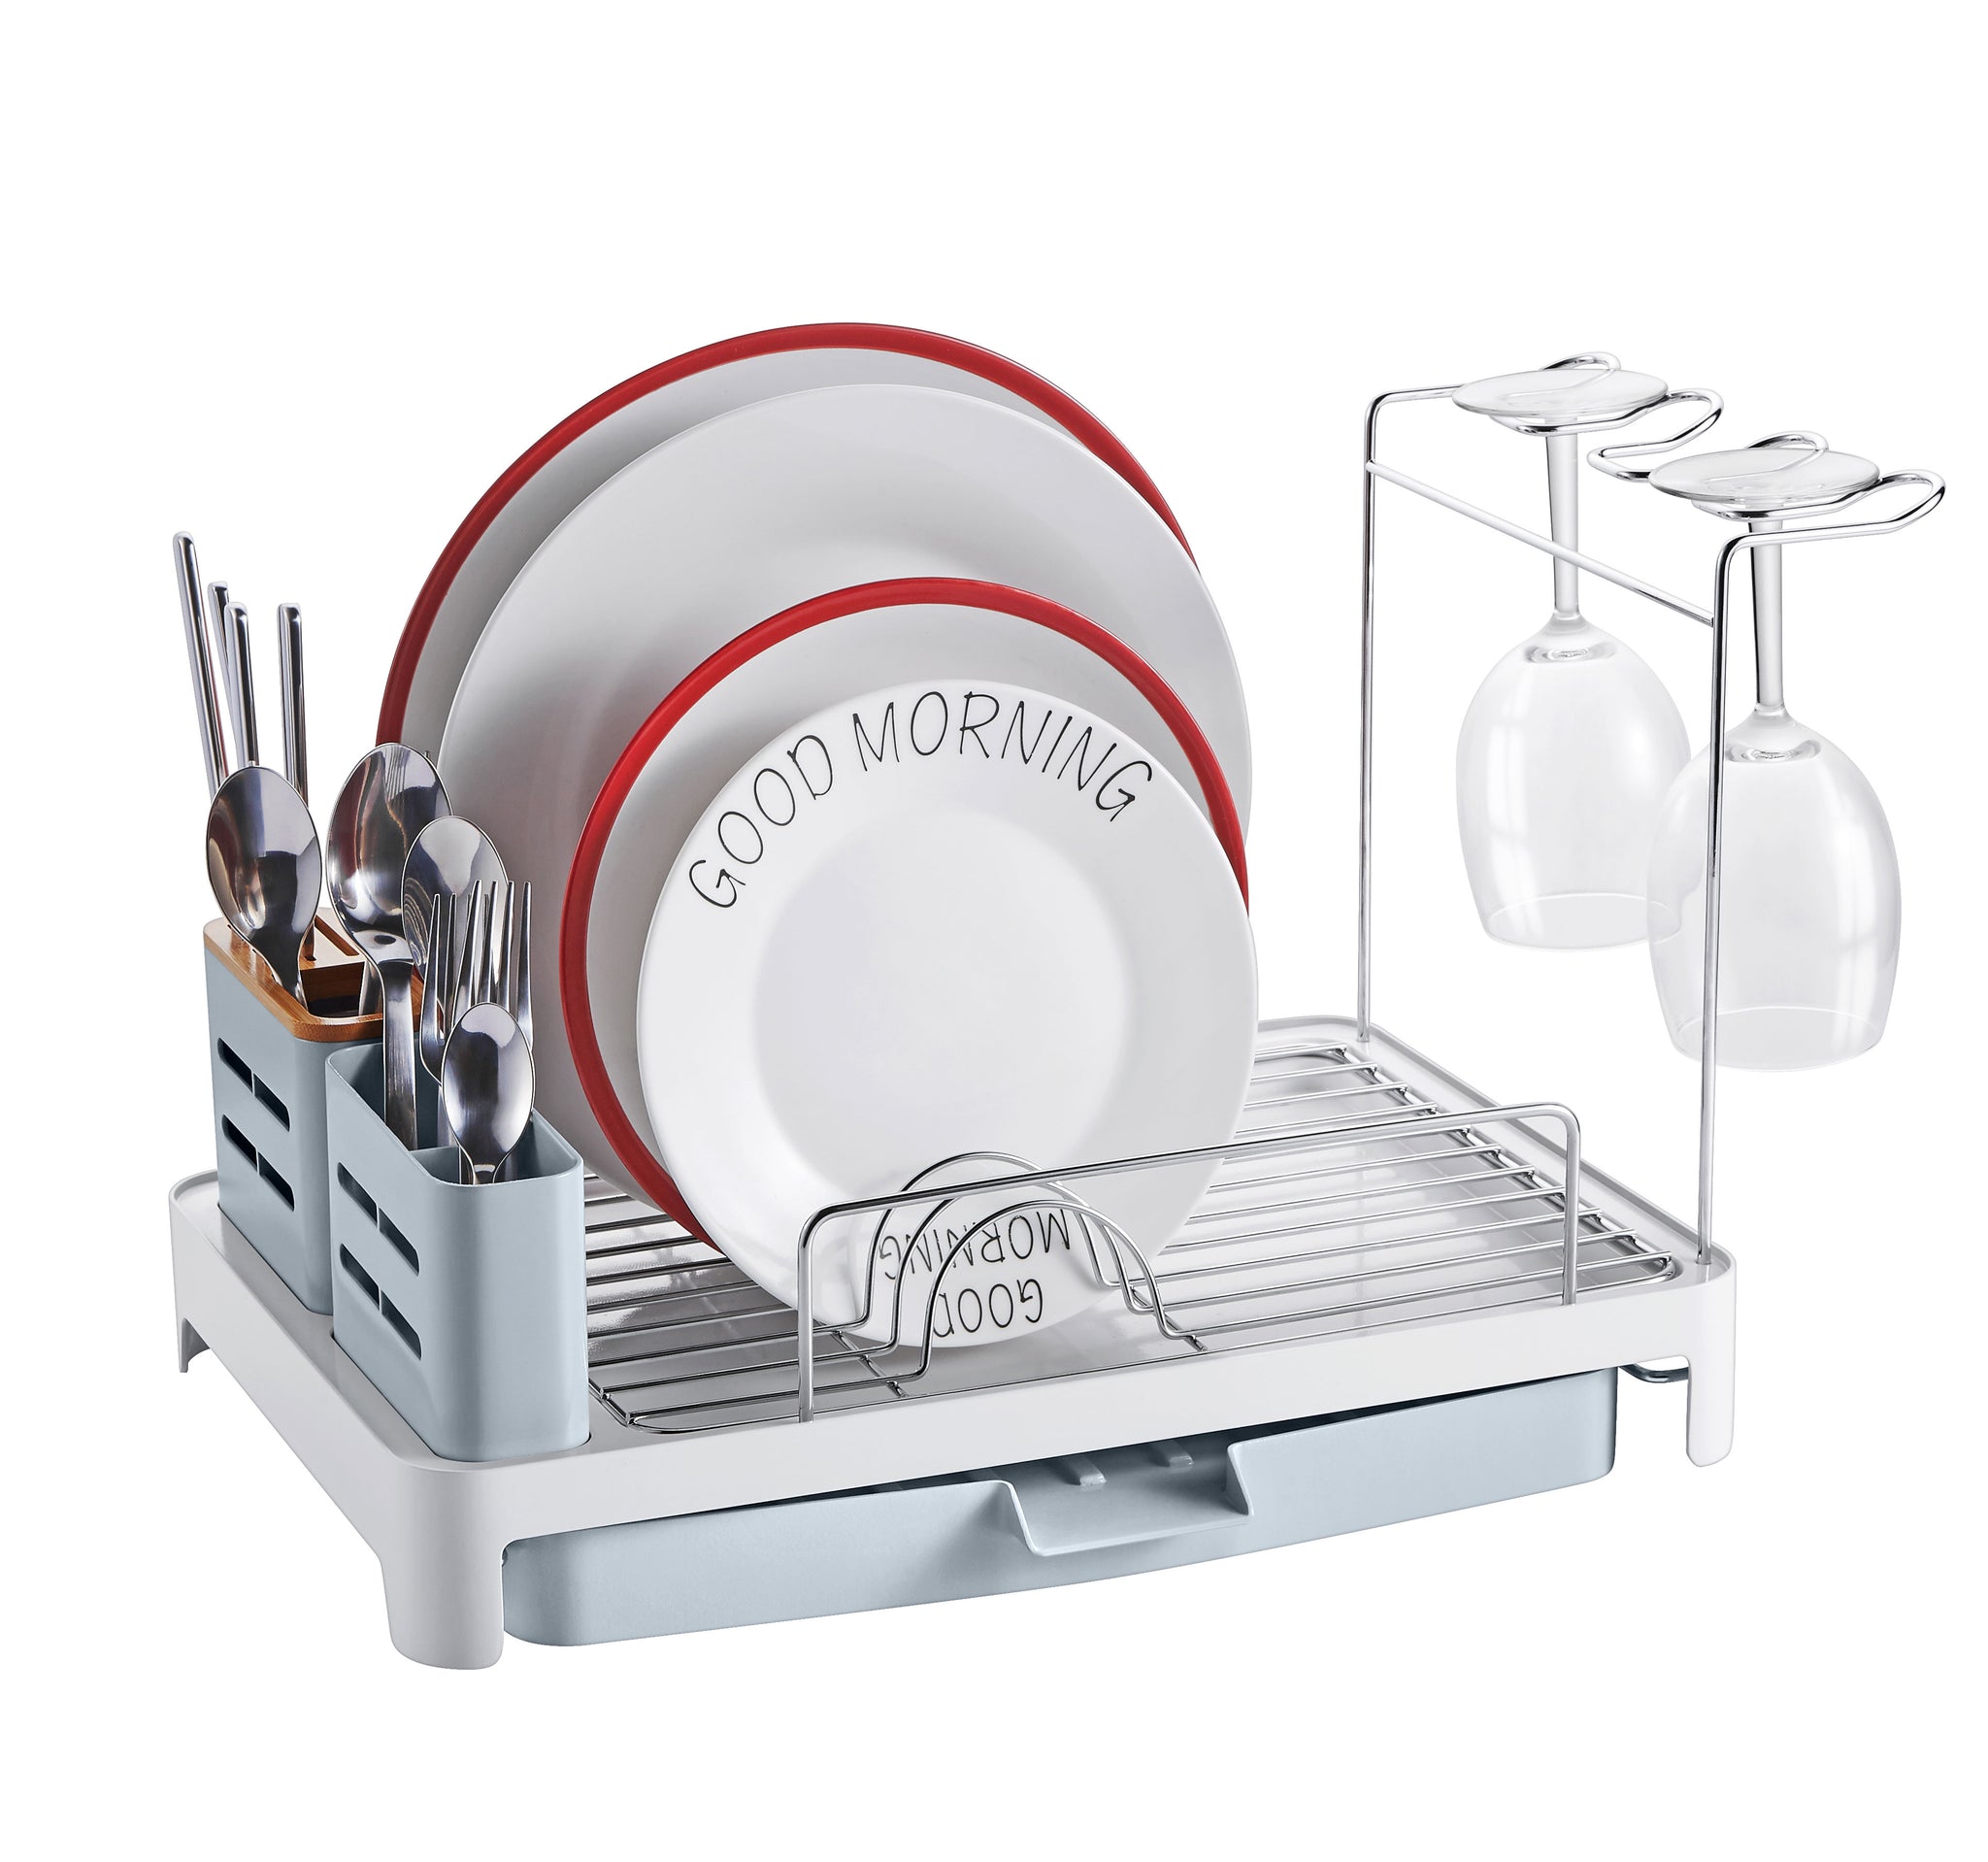 Rust Proof Dish Drying Rack with Plastic Drainboard and Utensil Holder -  China Dish Rack and Dish Drying Rack price